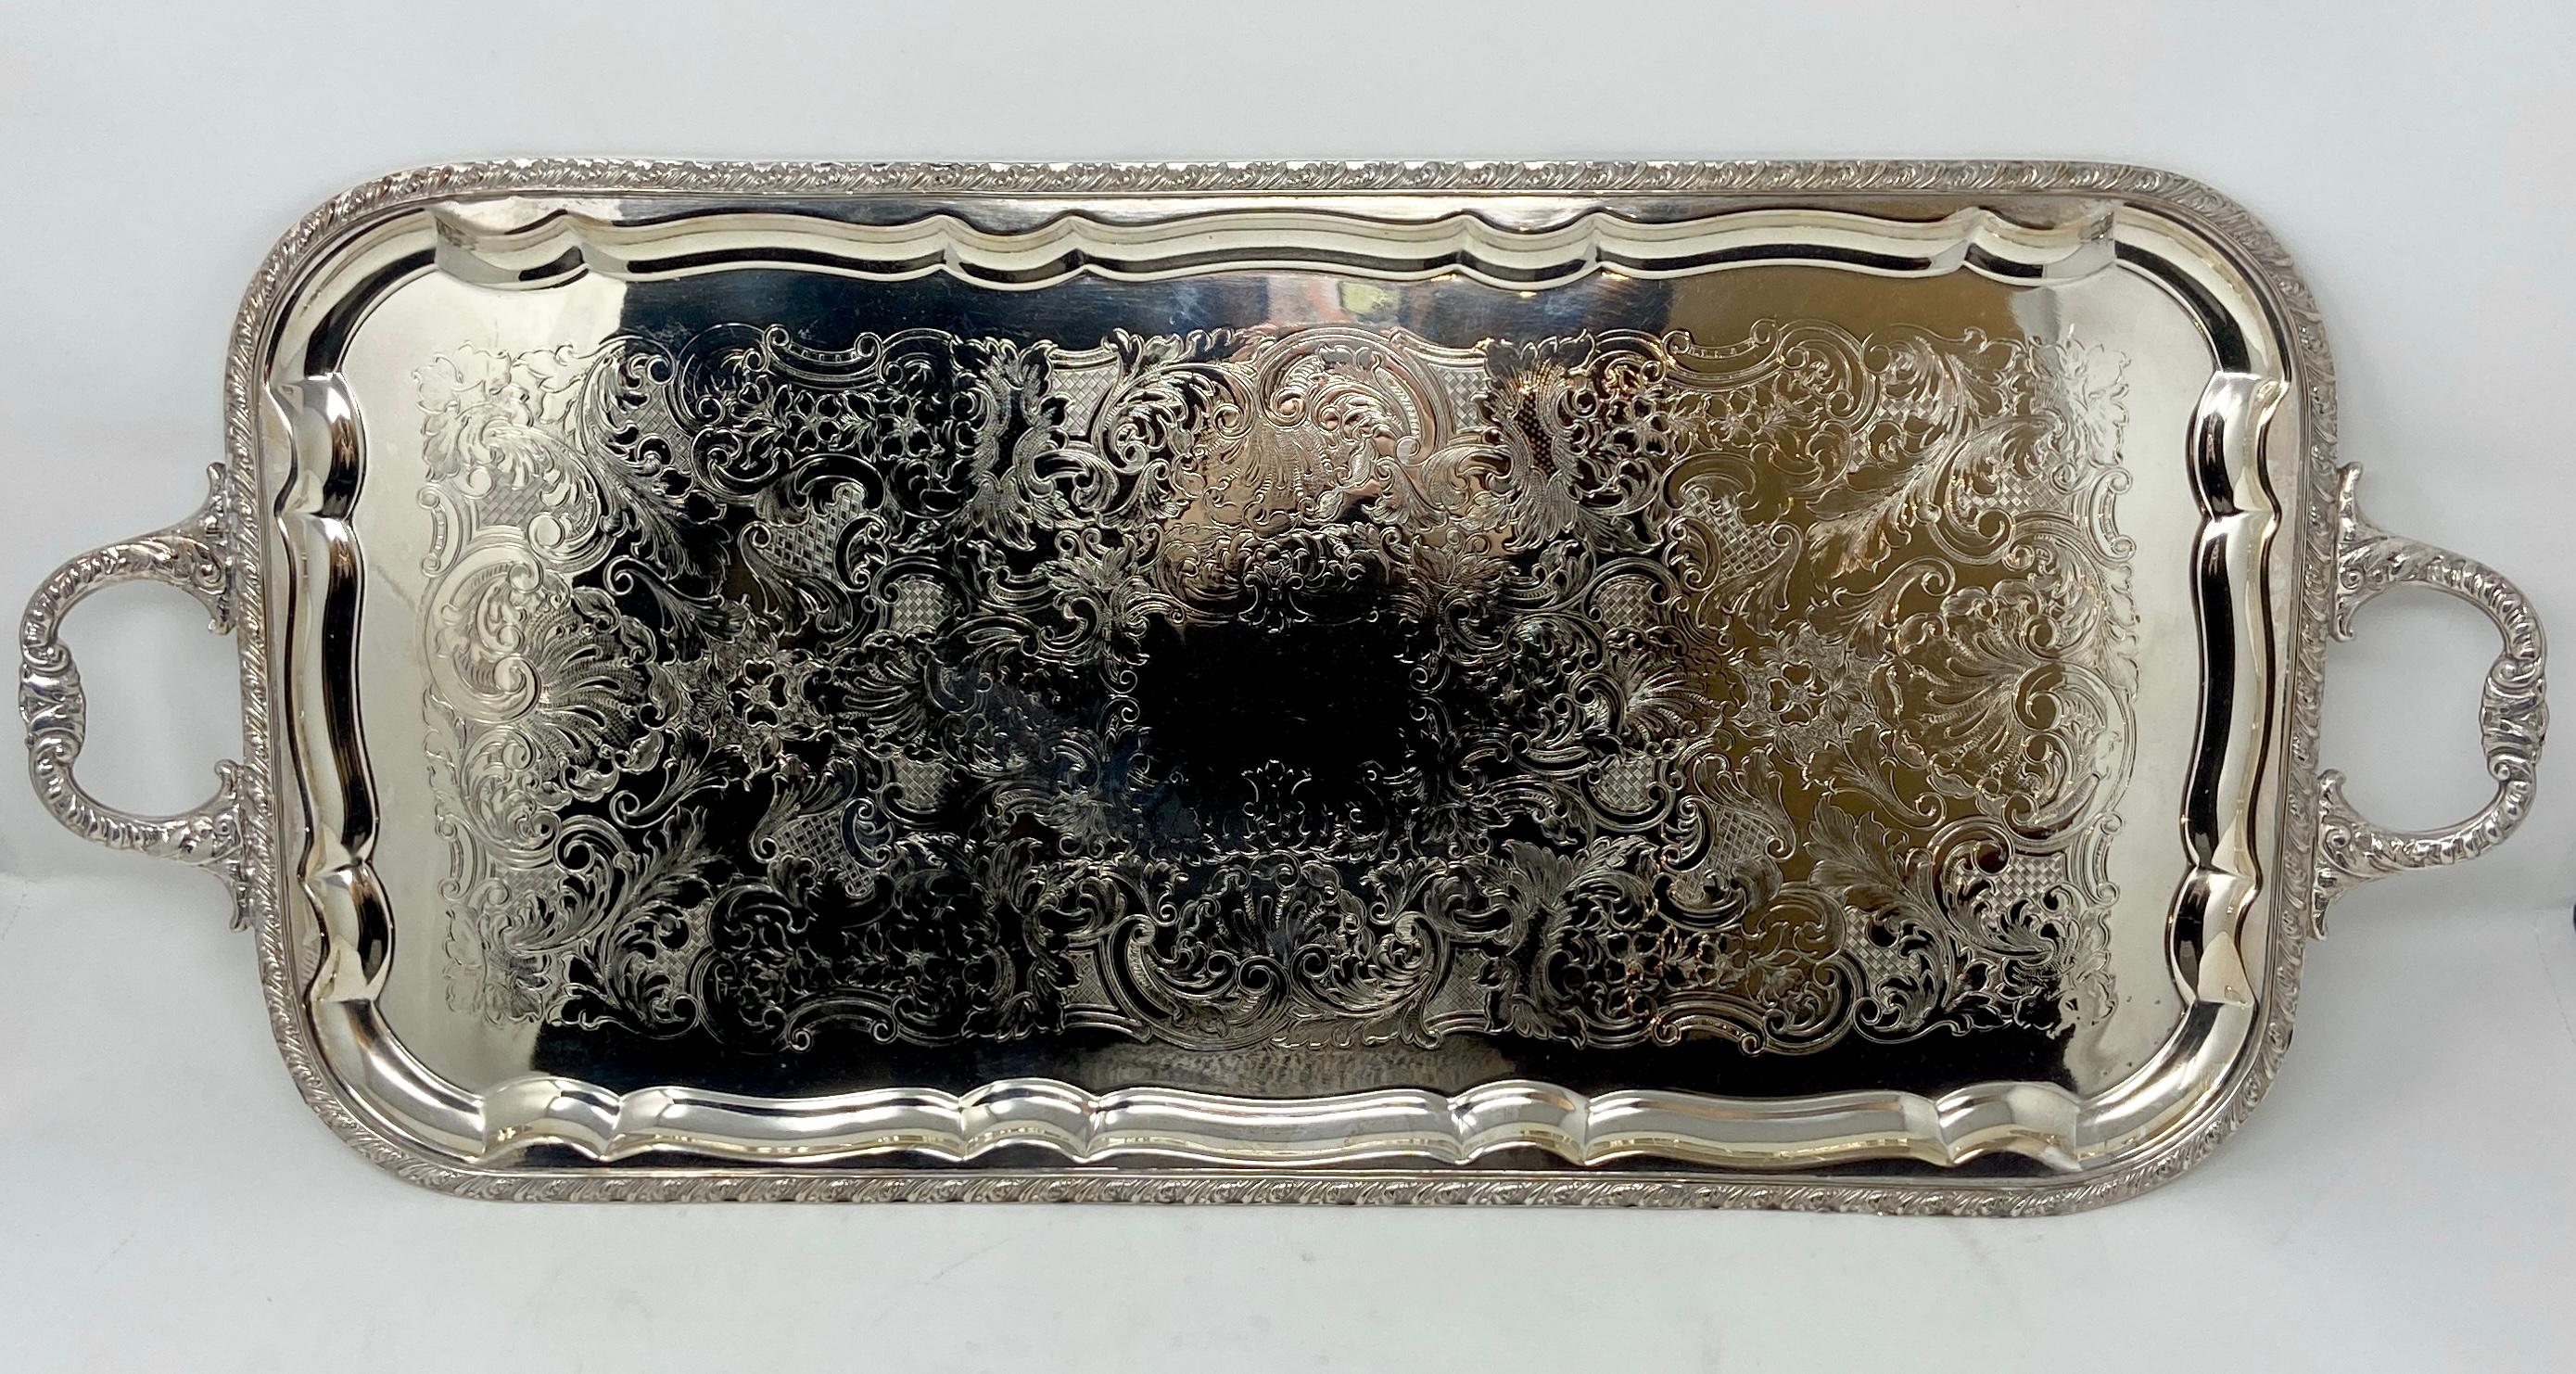 Antique English Sheffield silver-plate rectangular serving tray.